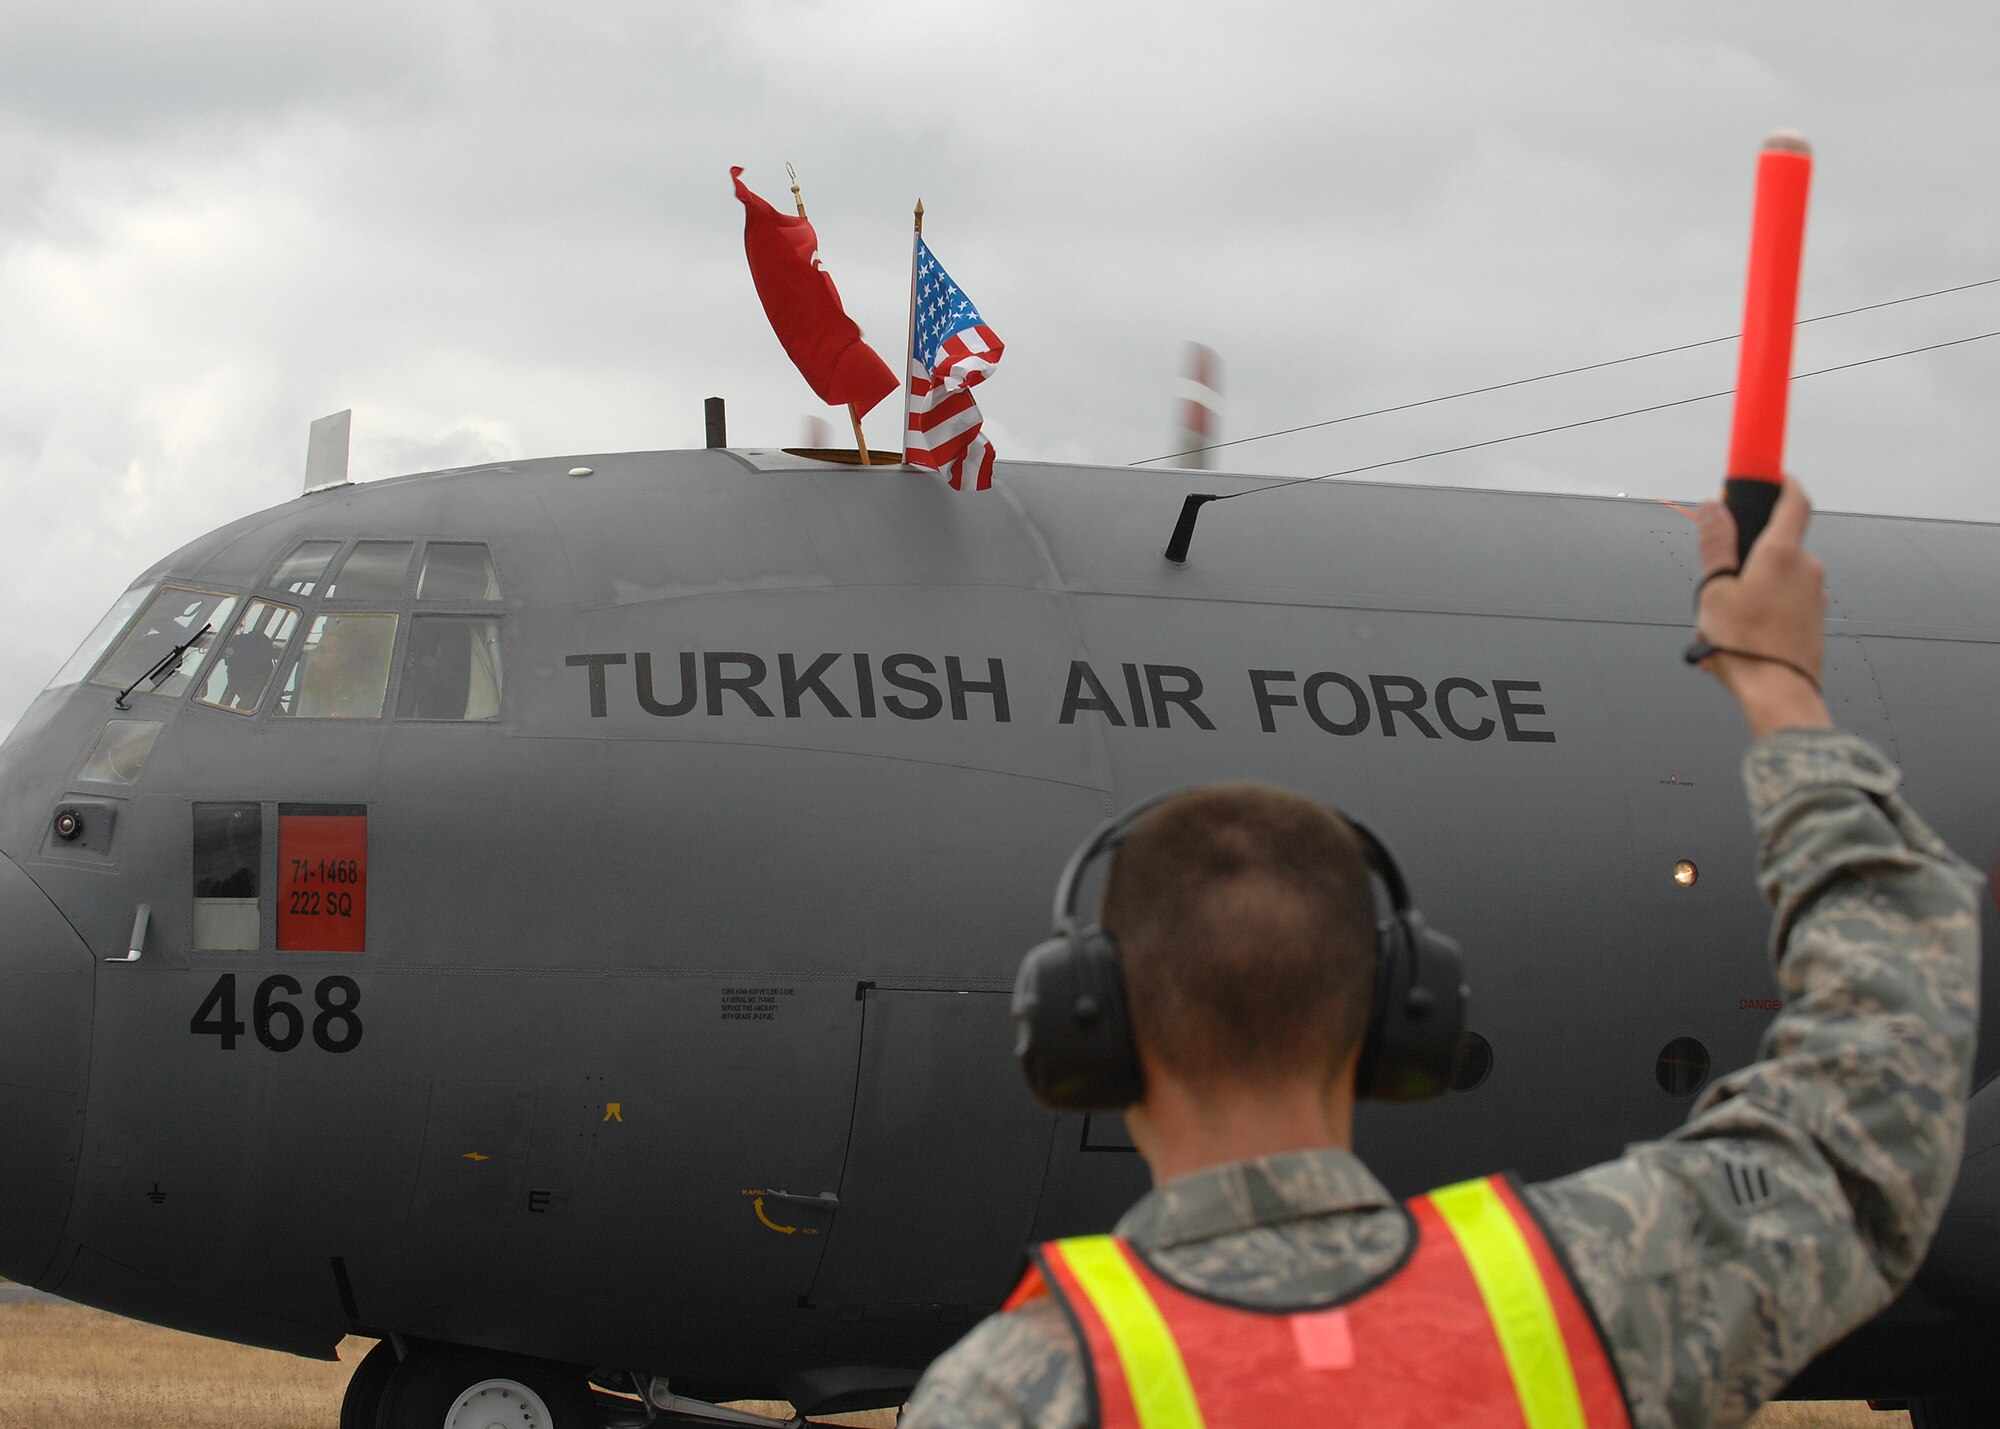 U.S. Air Force Senior Airman Luke Richardson from the 62nd Aircraft Maintenance Squadron, McChord AFB, WA, marshals in a Turkish Air Force C-130 Aircraft during the international competitor arrivals for AMC Rodeo 2009, McChord AFB, WA, July 13, 2009. RODEO is an international combat skills and flying operations competition designed to develop and improve techniques and procedures with our international partners to enhance mobility operations (U.S. Air Force photo by SSgt Stephen Schester/Released)  